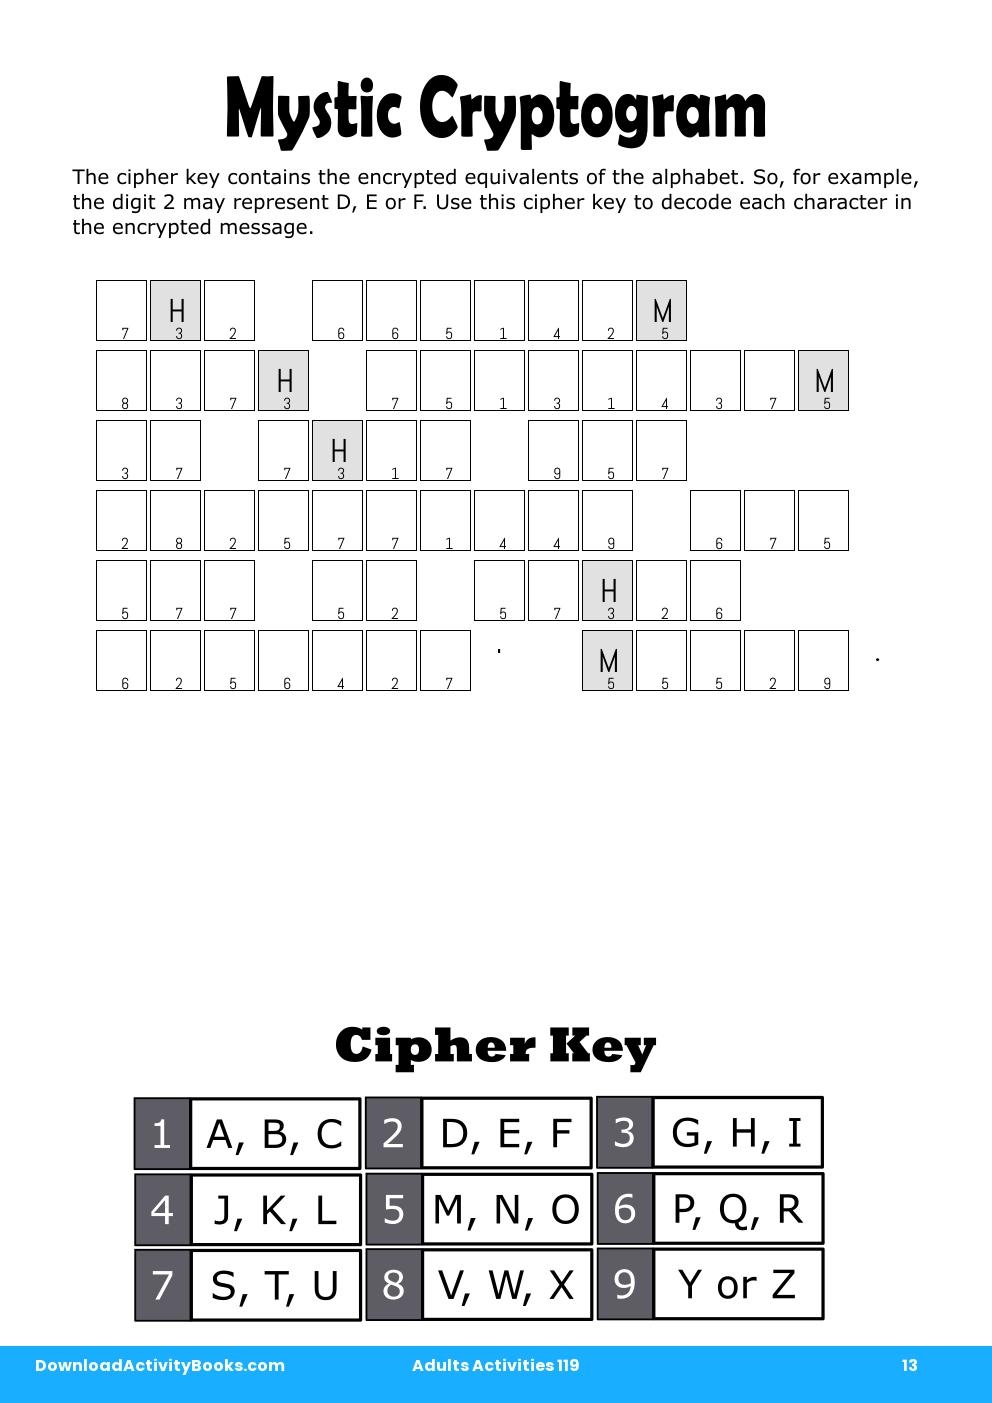 Mystic Cryptogram in Adults Activities 119